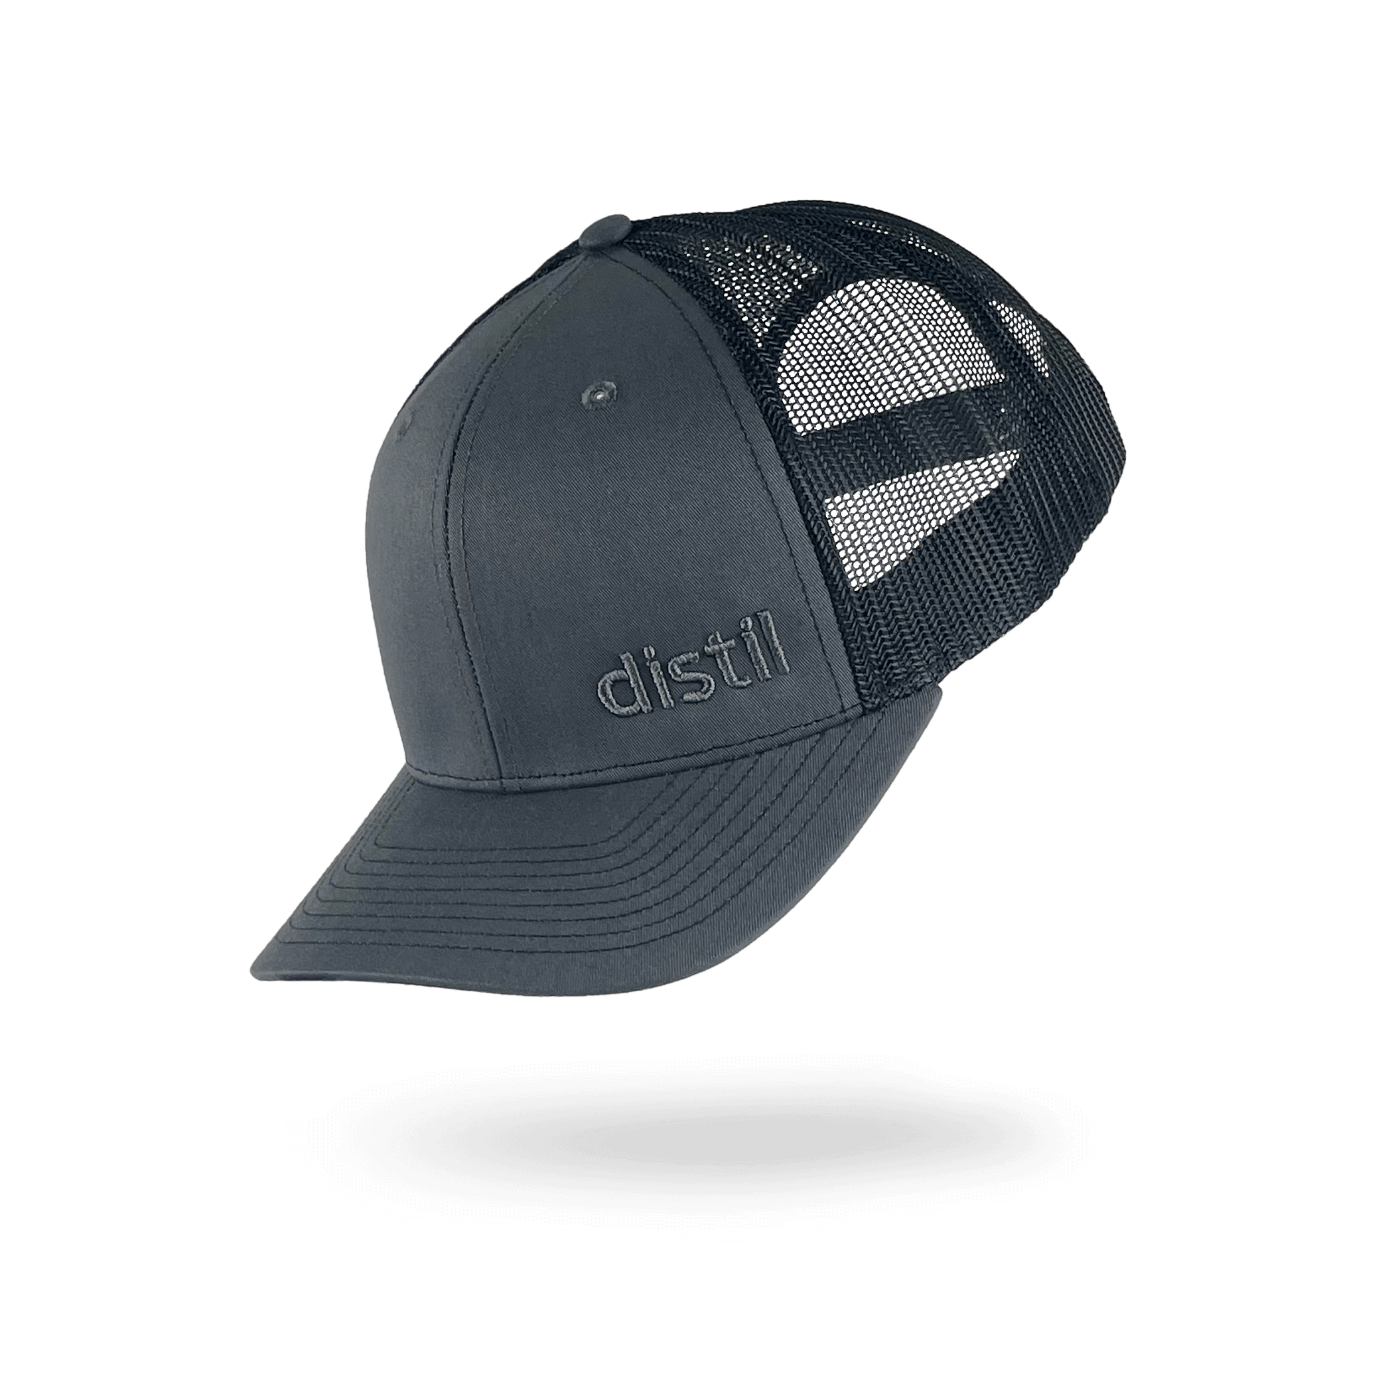 Distil embroidered hat in gray and black